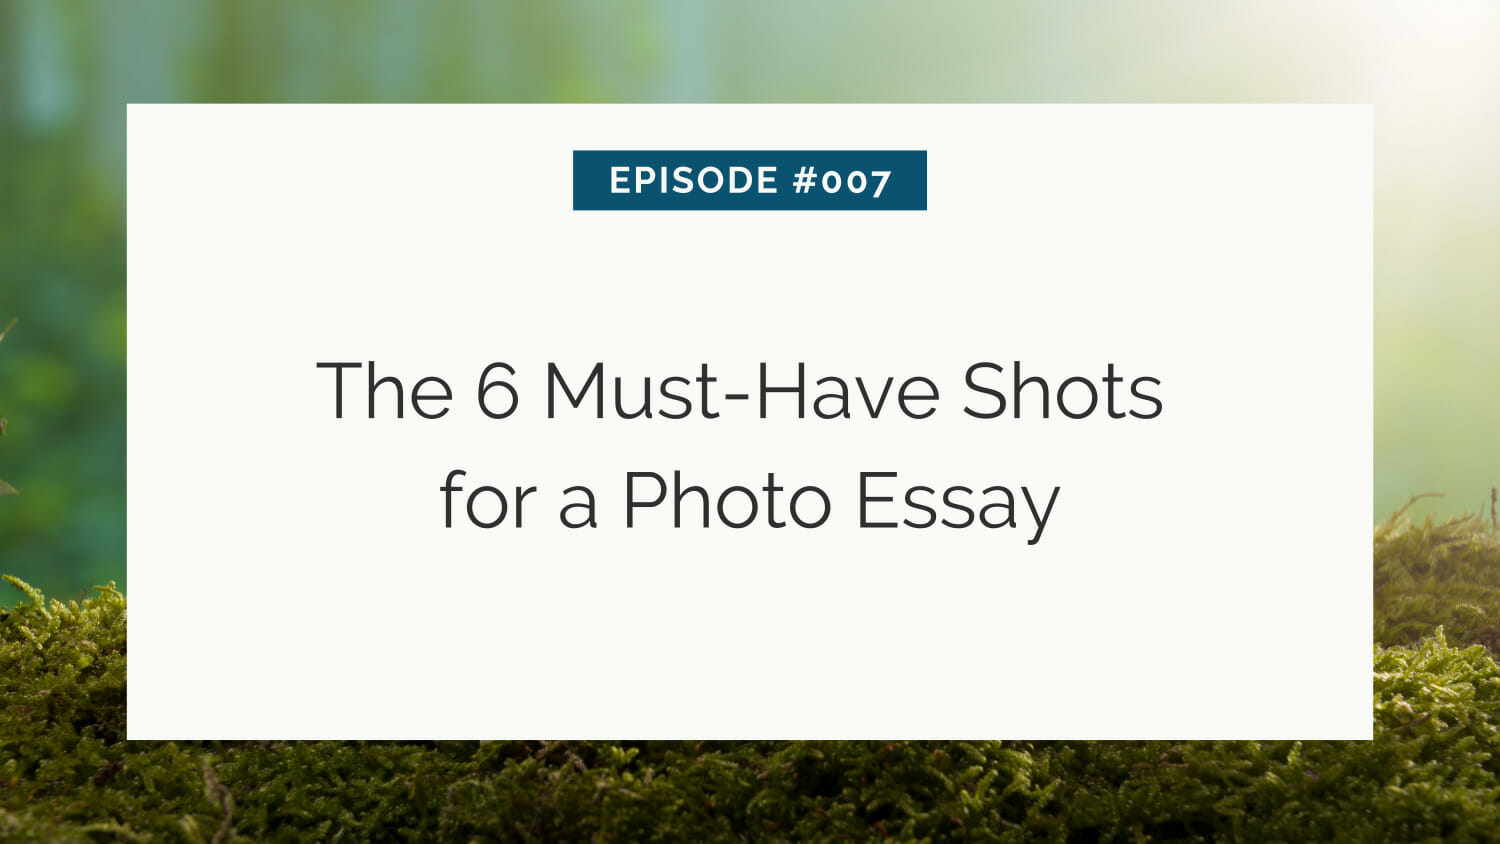 Presentation slide titled "episode #007 - the 6 must-have shots for a photo essay" with a blurred natural background.